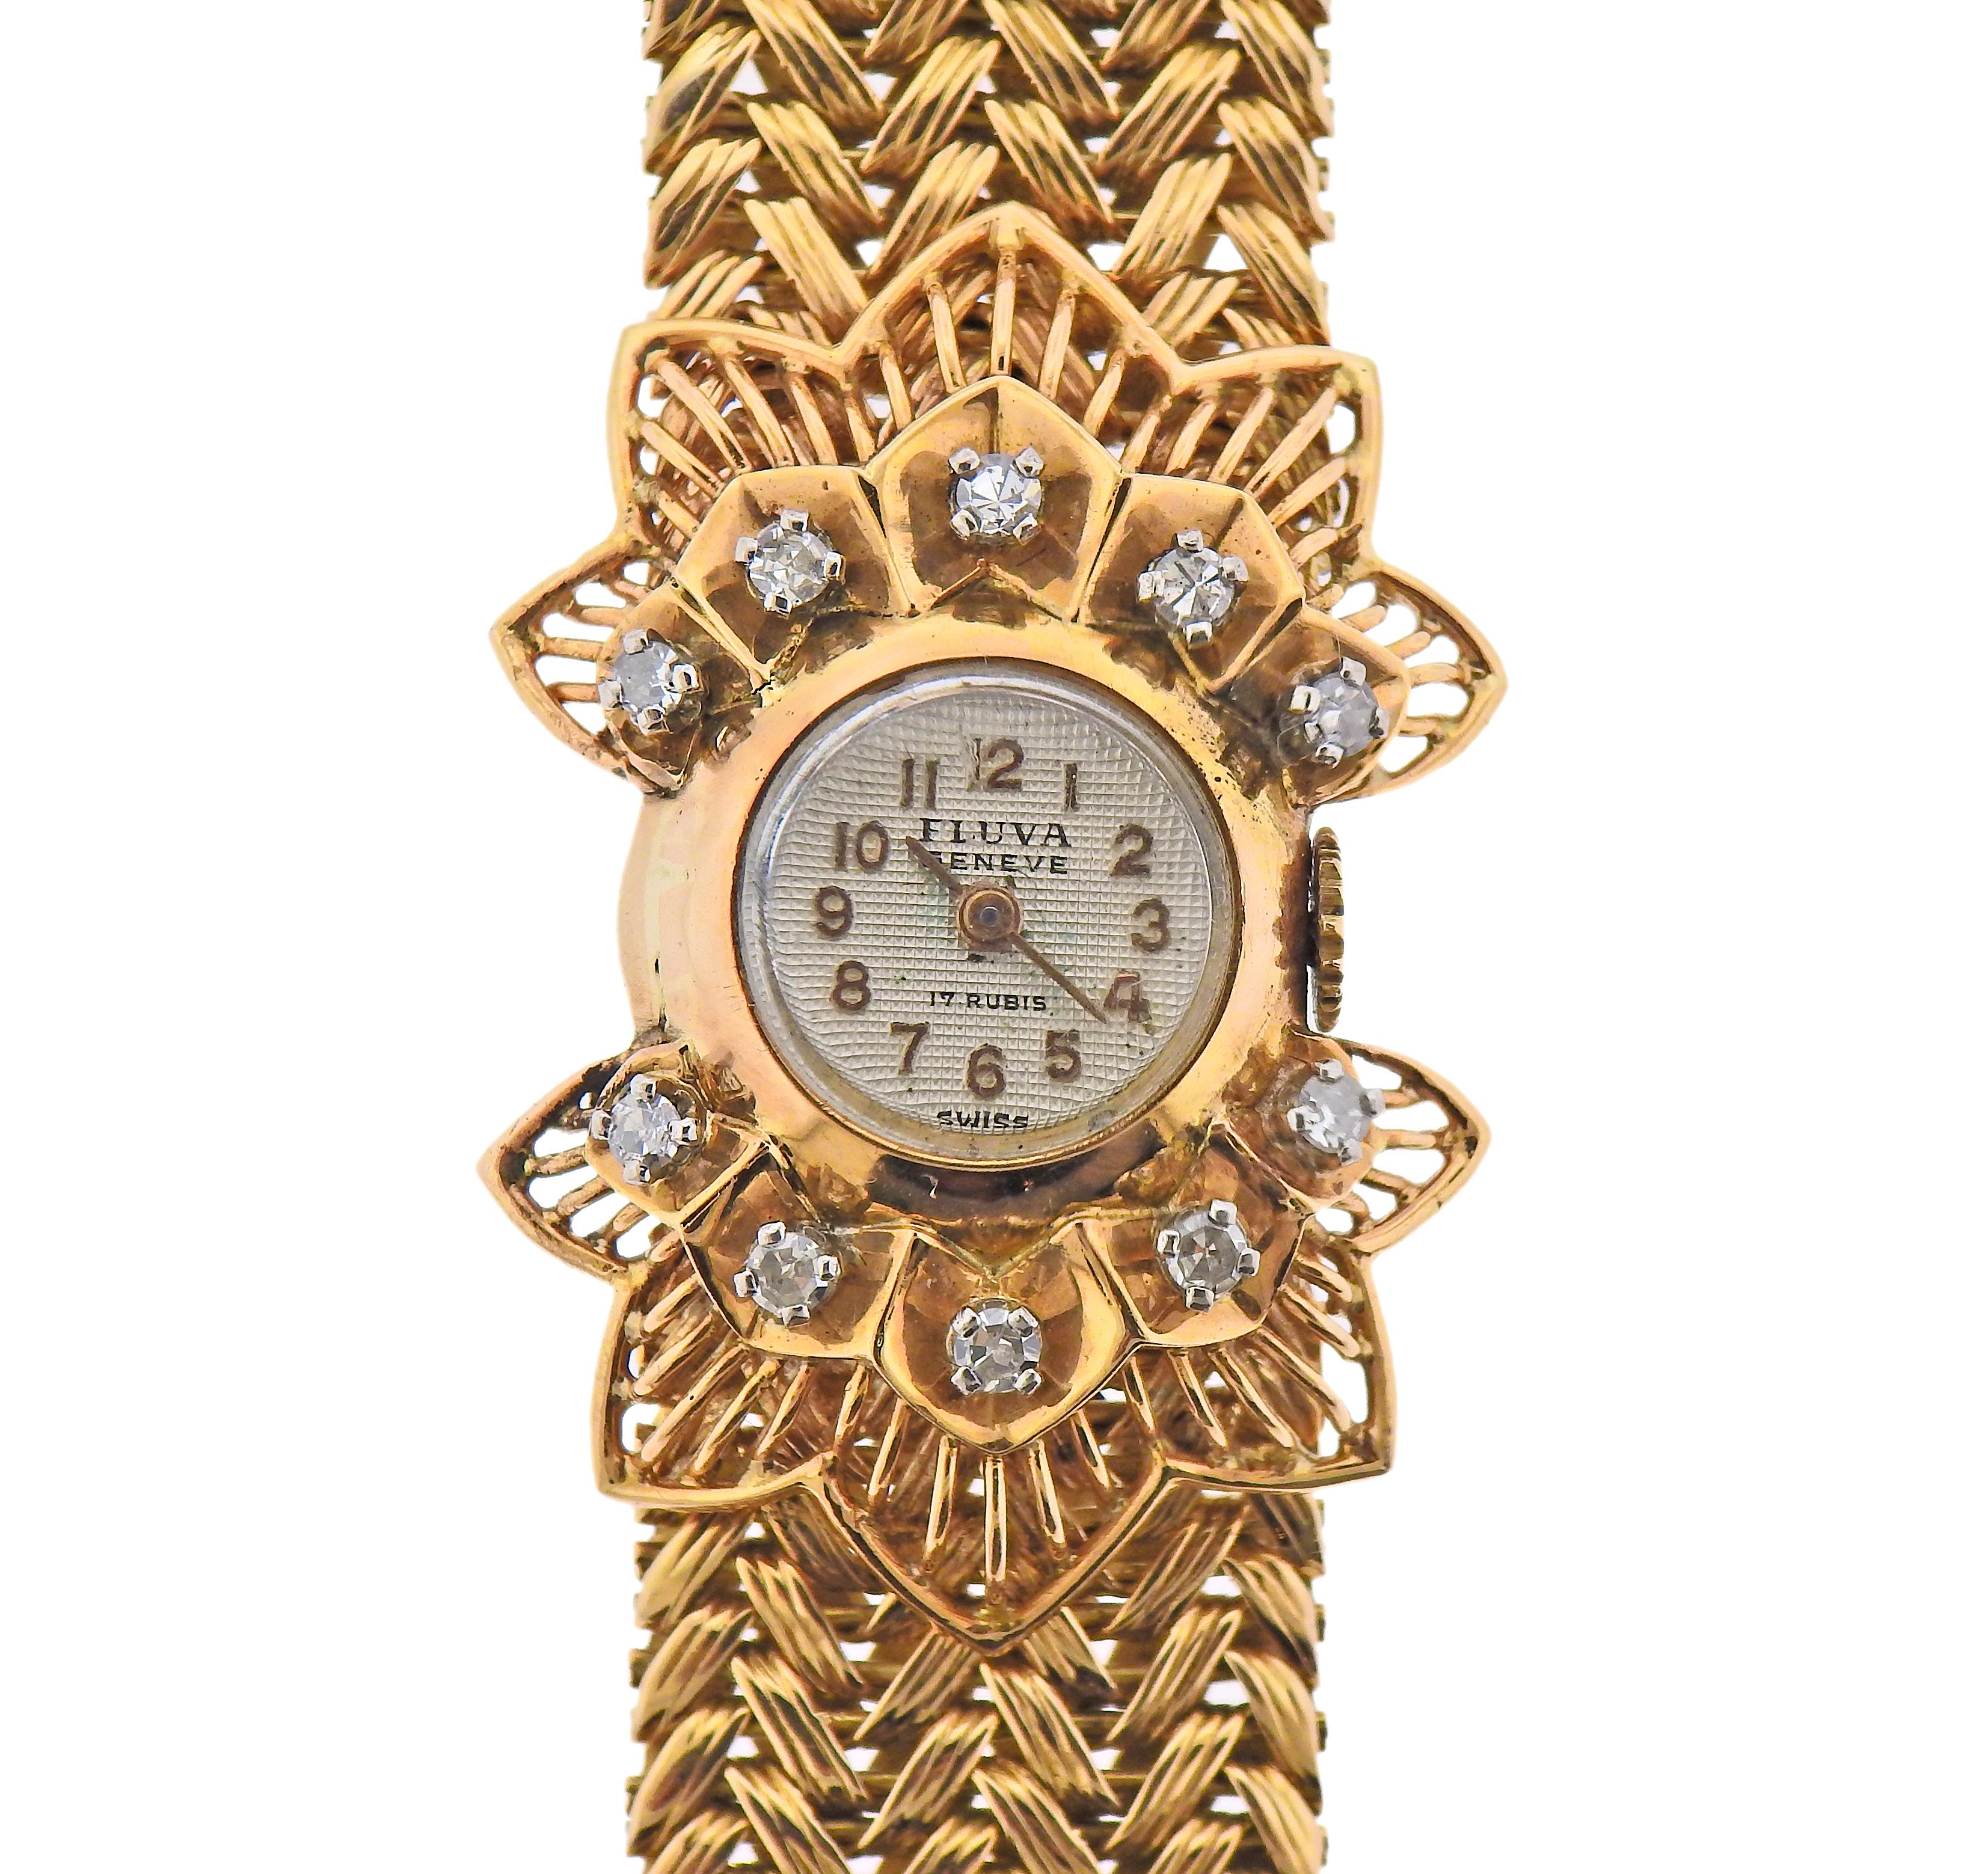 Circa 1940s Retro French-made Fluva 18k gold watch, decorated with approx. 0.50ctw in diamonds. Bracelet is 6.25